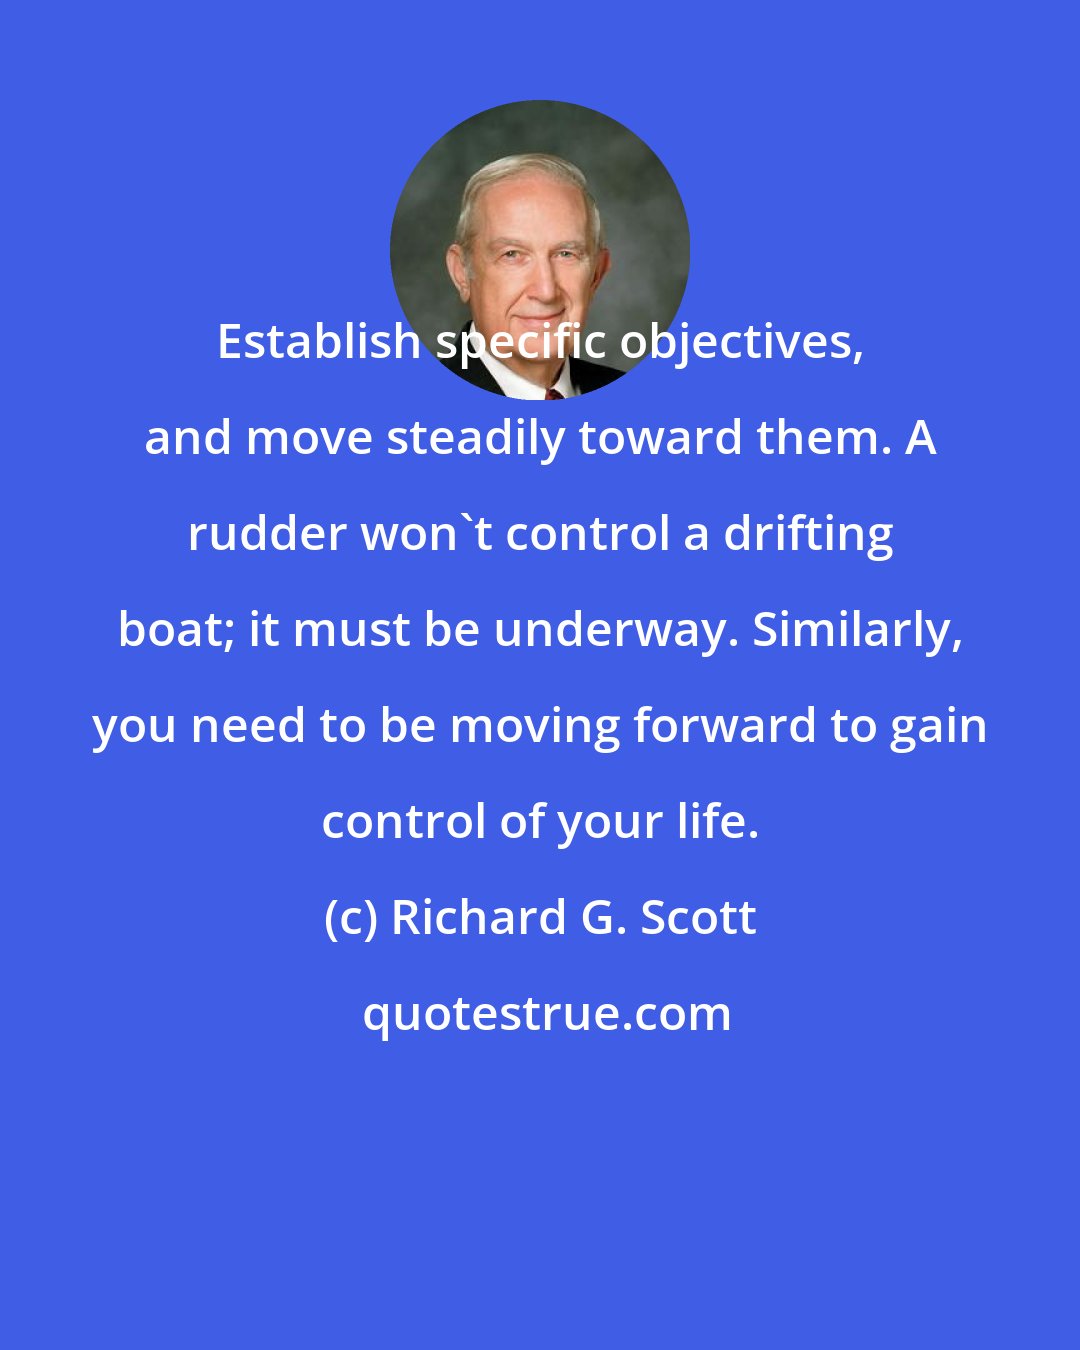 Richard G. Scott: Establish specific objectives, and move steadily toward them. A rudder won't control a drifting boat; it must be underway. Similarly, you need to be moving forward to gain control of your life.